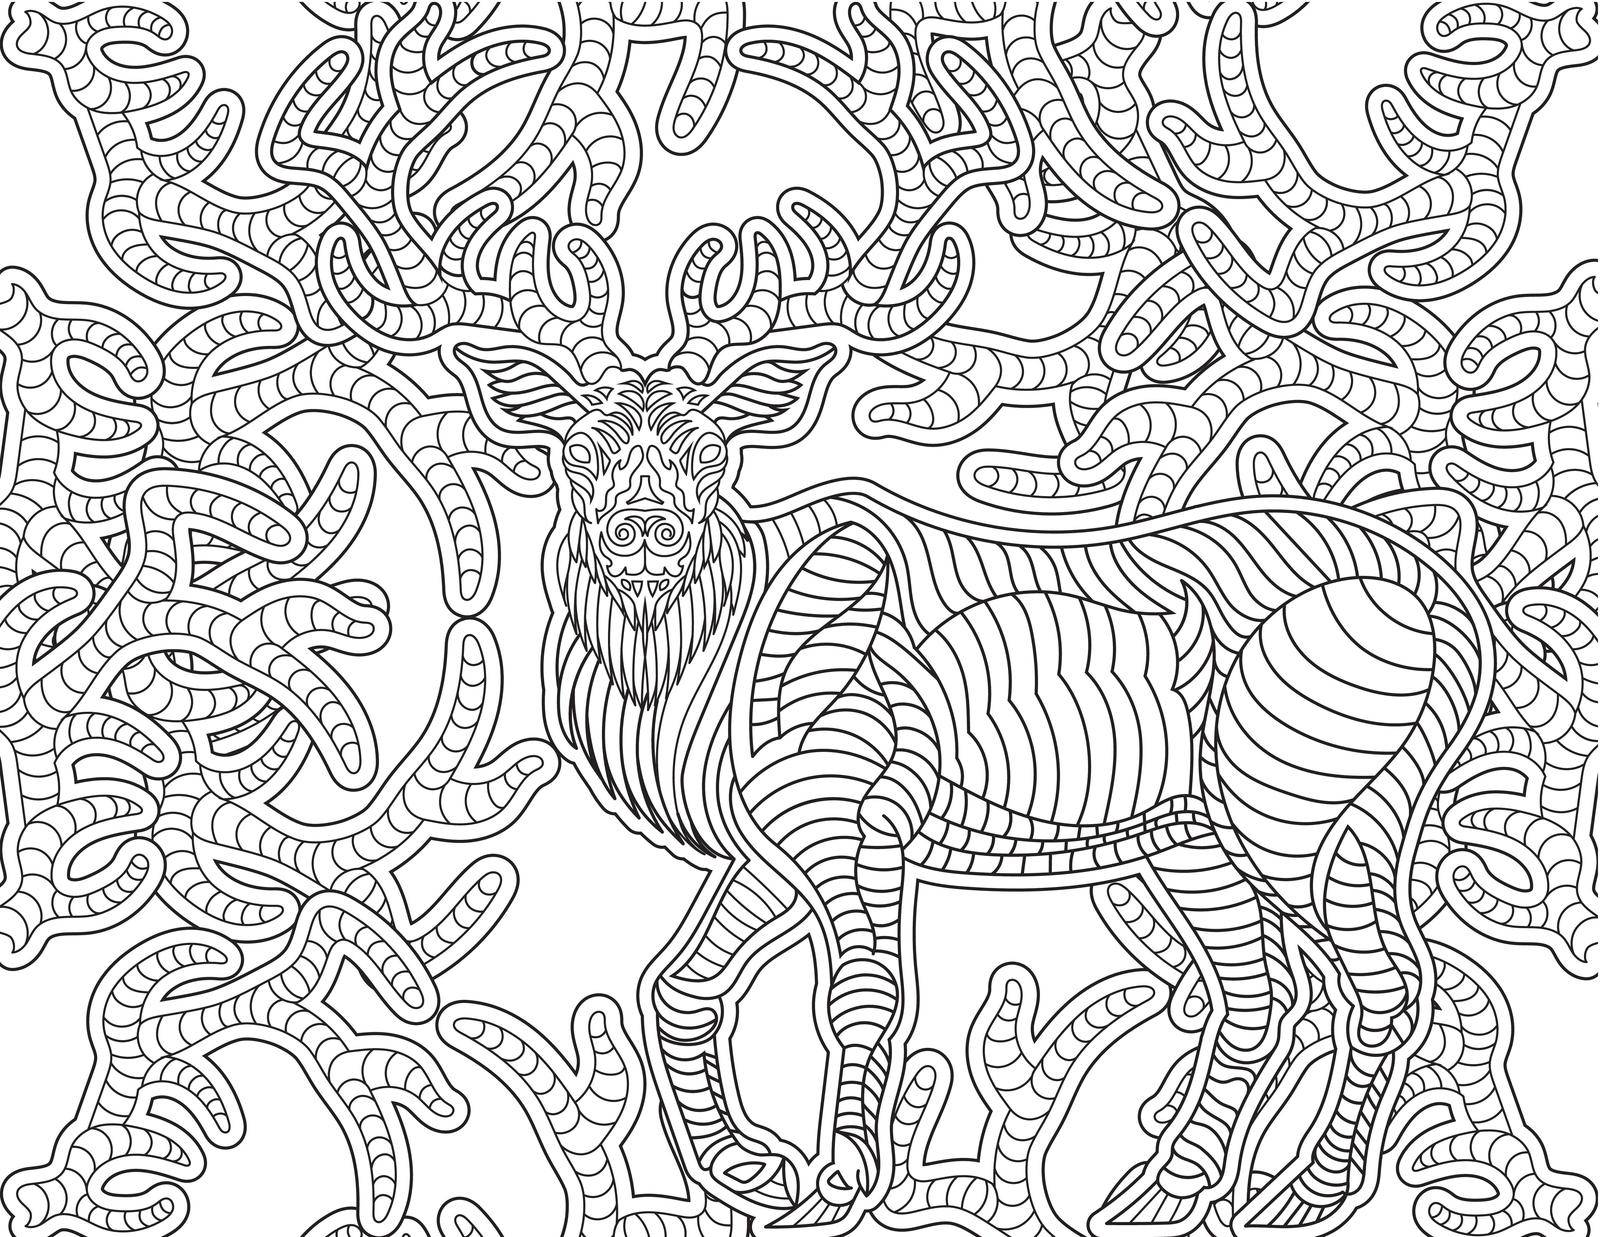 Deer Line Drawing With Long Horns Growing Around It Coloring Book